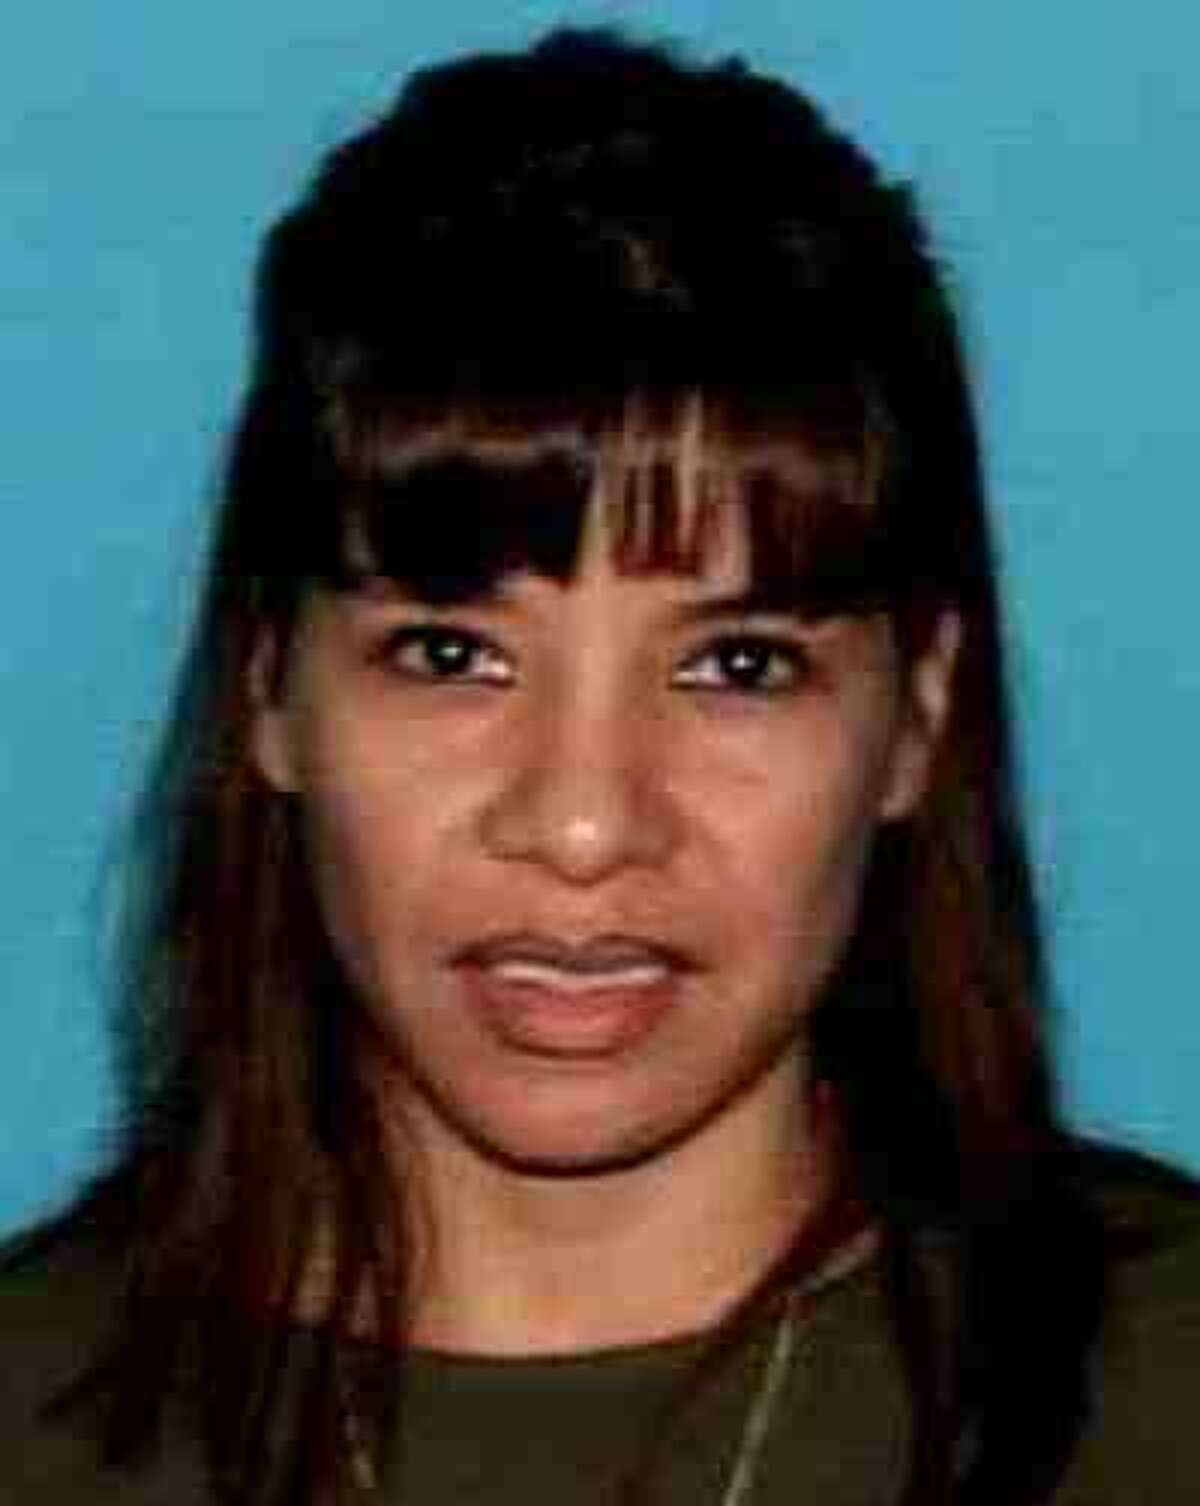 Susana Christina Perez Born: 12/29/1973 Last seen: 12/8/2010 in San AntonioCircumstances: Ms. Perez walks with a limp due to an injury to her right knee. Has a scar on her left cheek and a scar under each eyebrow.